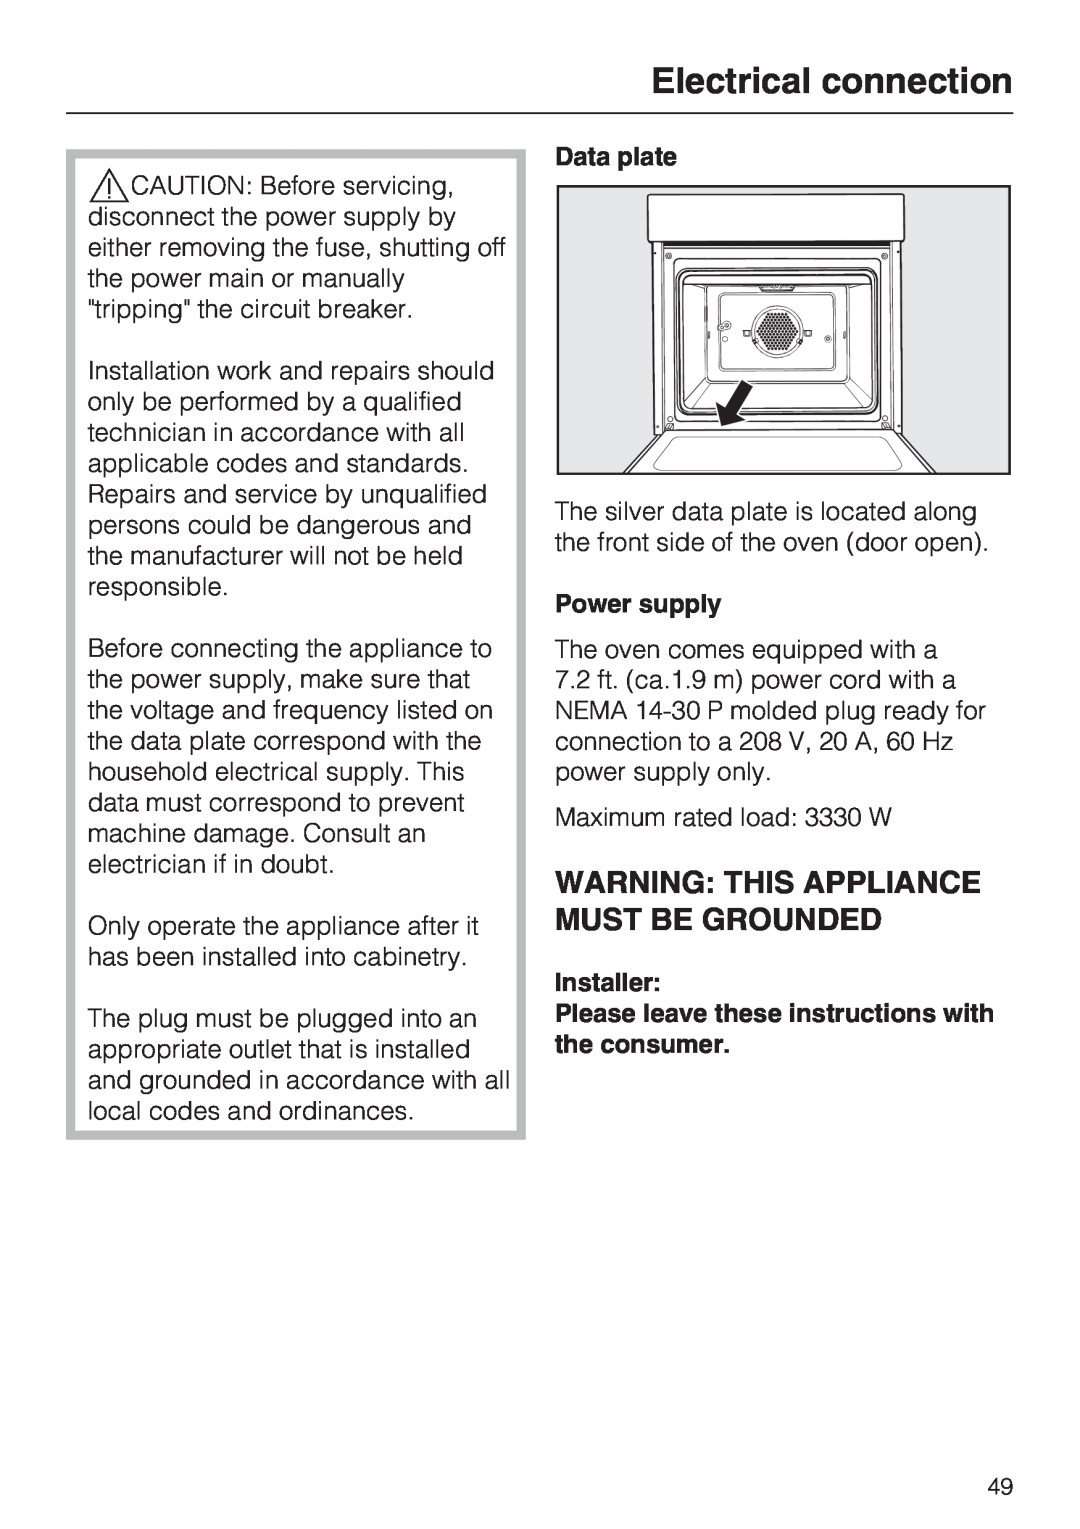 Miele H 4242 B installation instructions Electrical connection, Warning This Appliance Must Be Grounded 